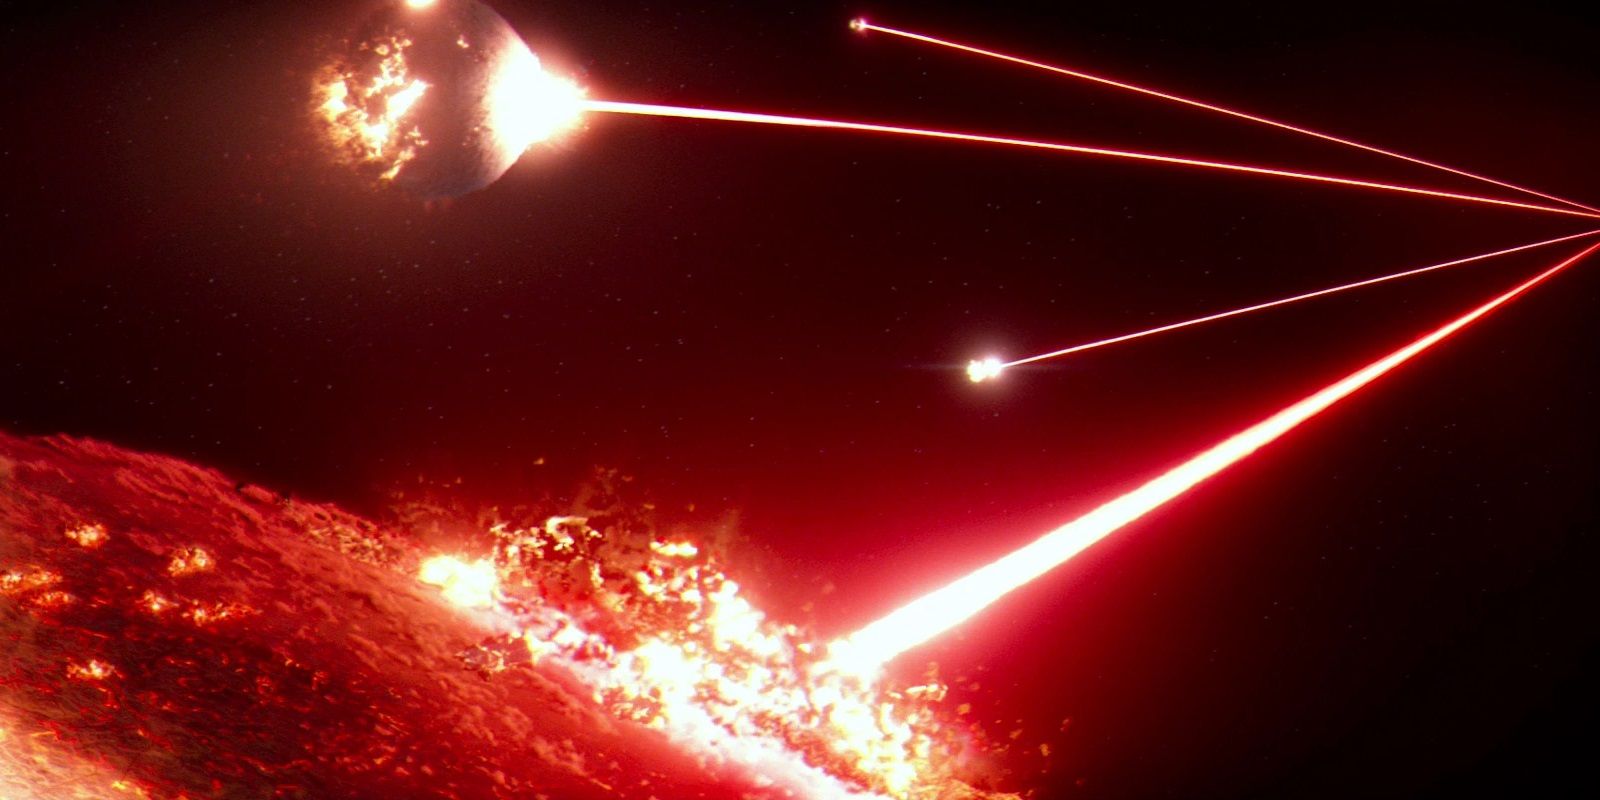 Starkiller Base blows up planets in Star Wars The Force Awakens